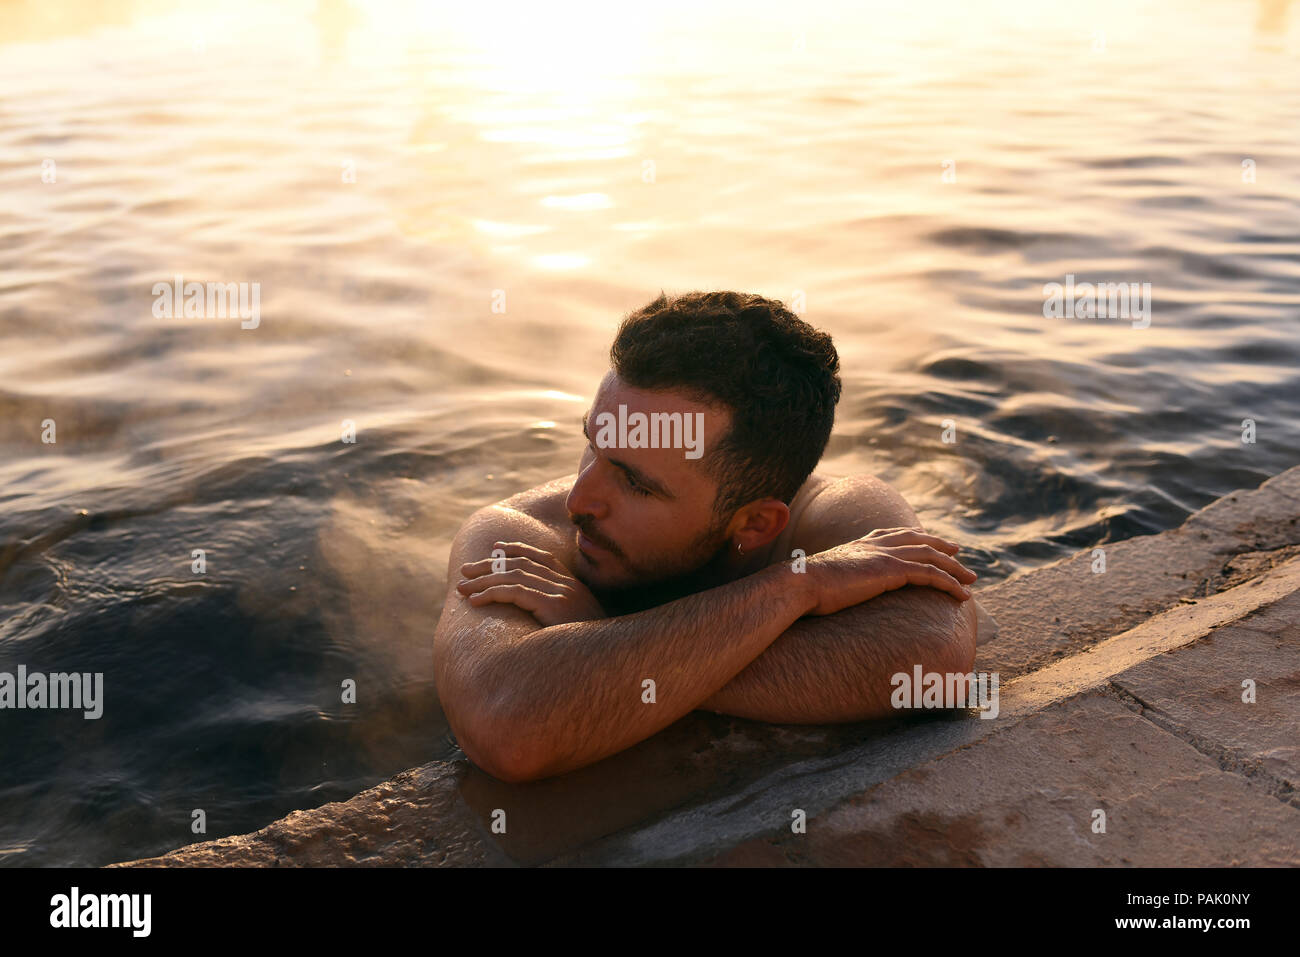 Man bathing in the hot springs with sunrise lit steam rising in the background. Termas de Polques, Sud Lípez province, Bolivia. Stock Photo